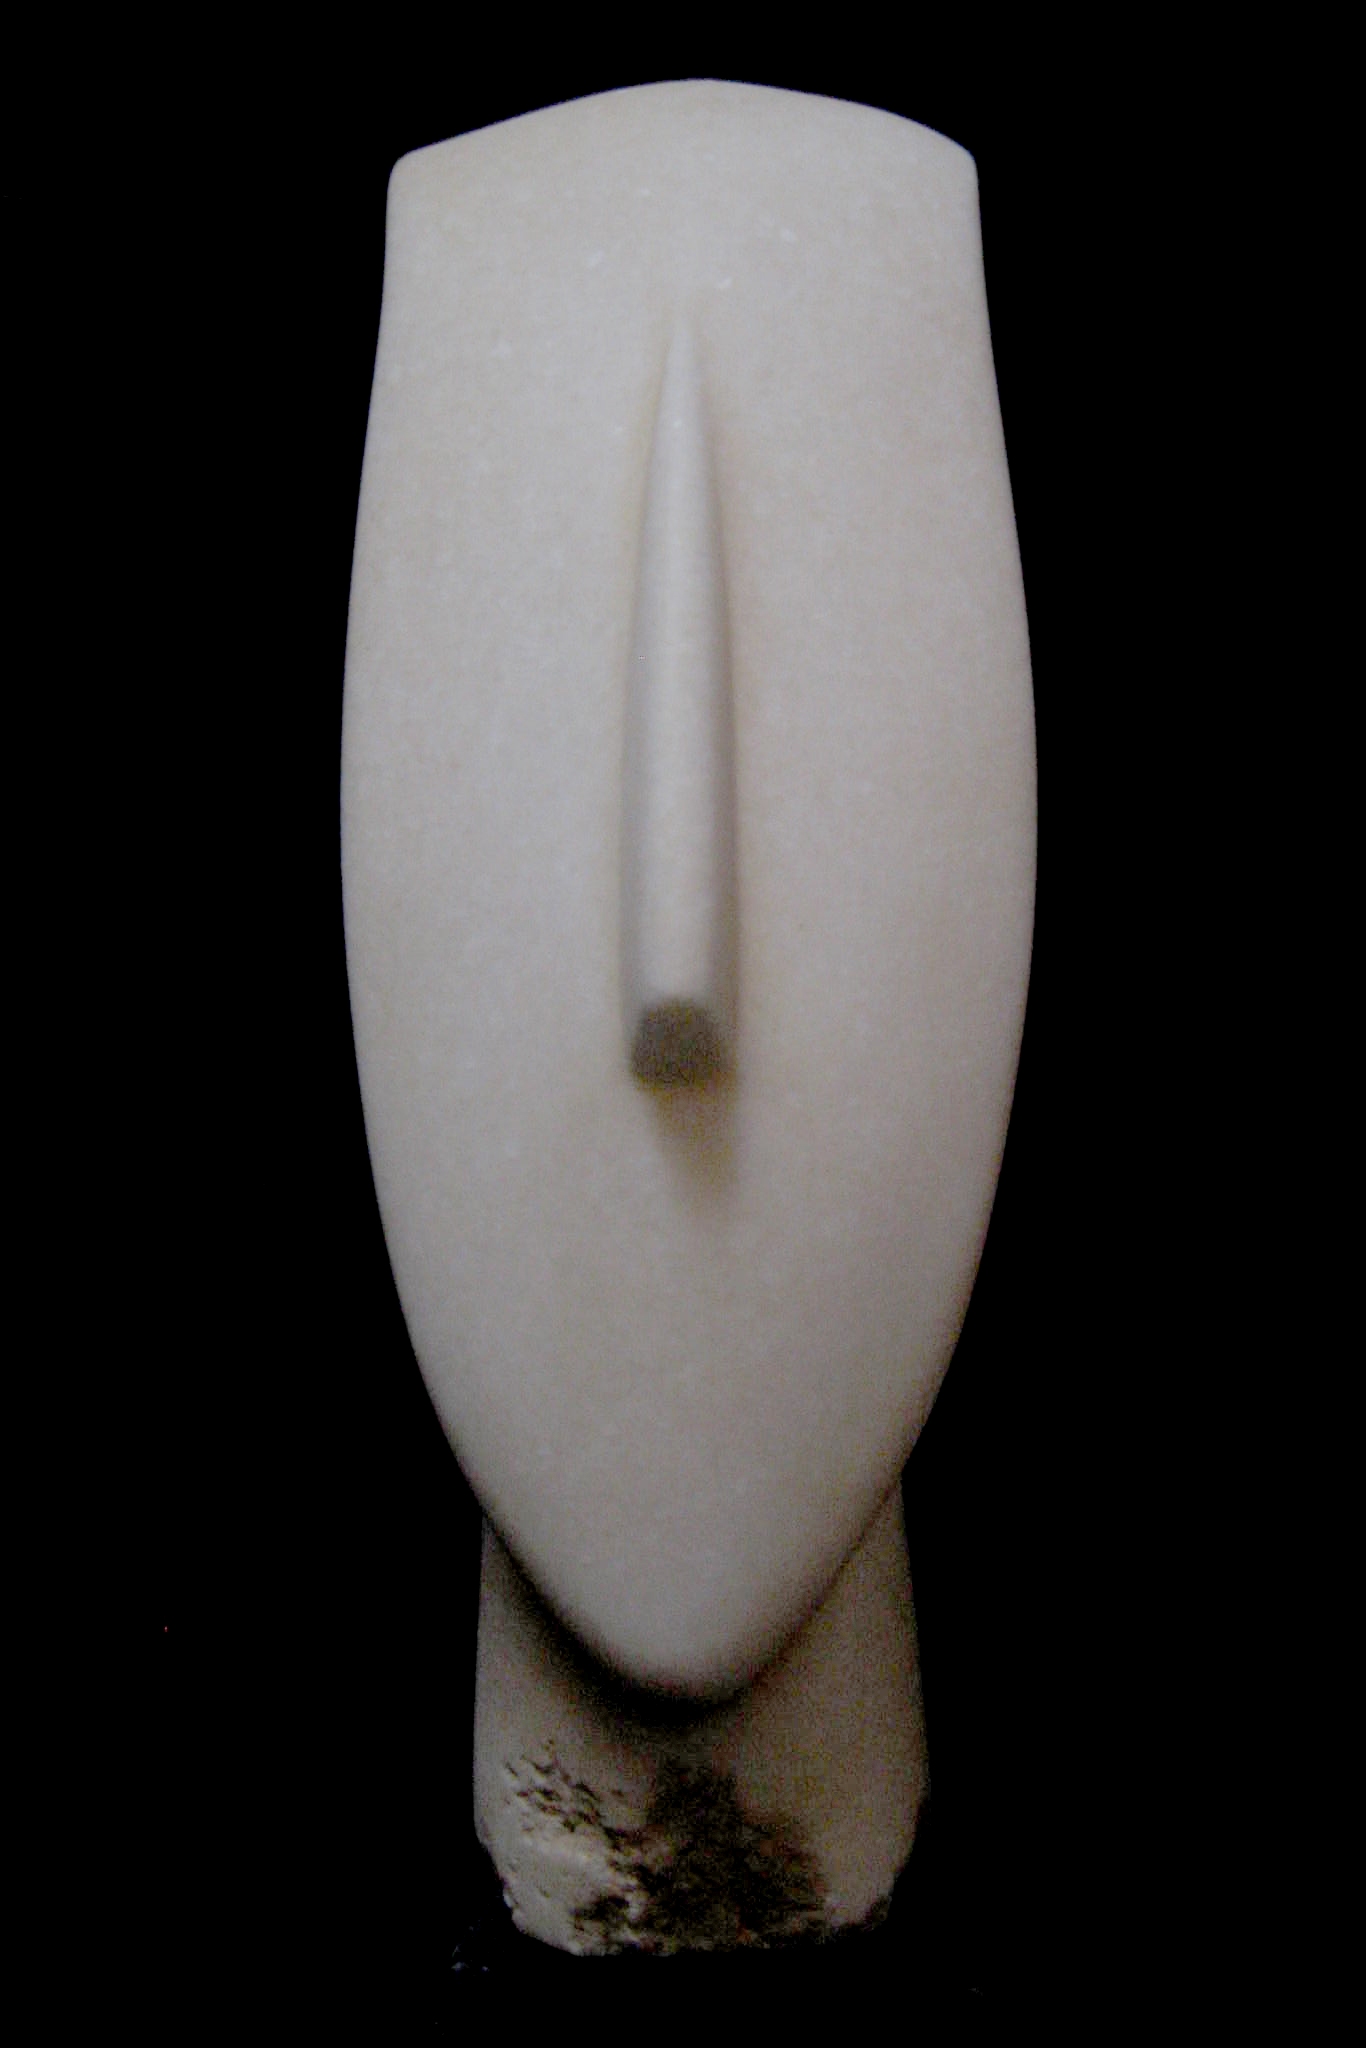 Cycladic head from the Aegean (dated 3300 - 2000 BC), its mute face raised to the sky